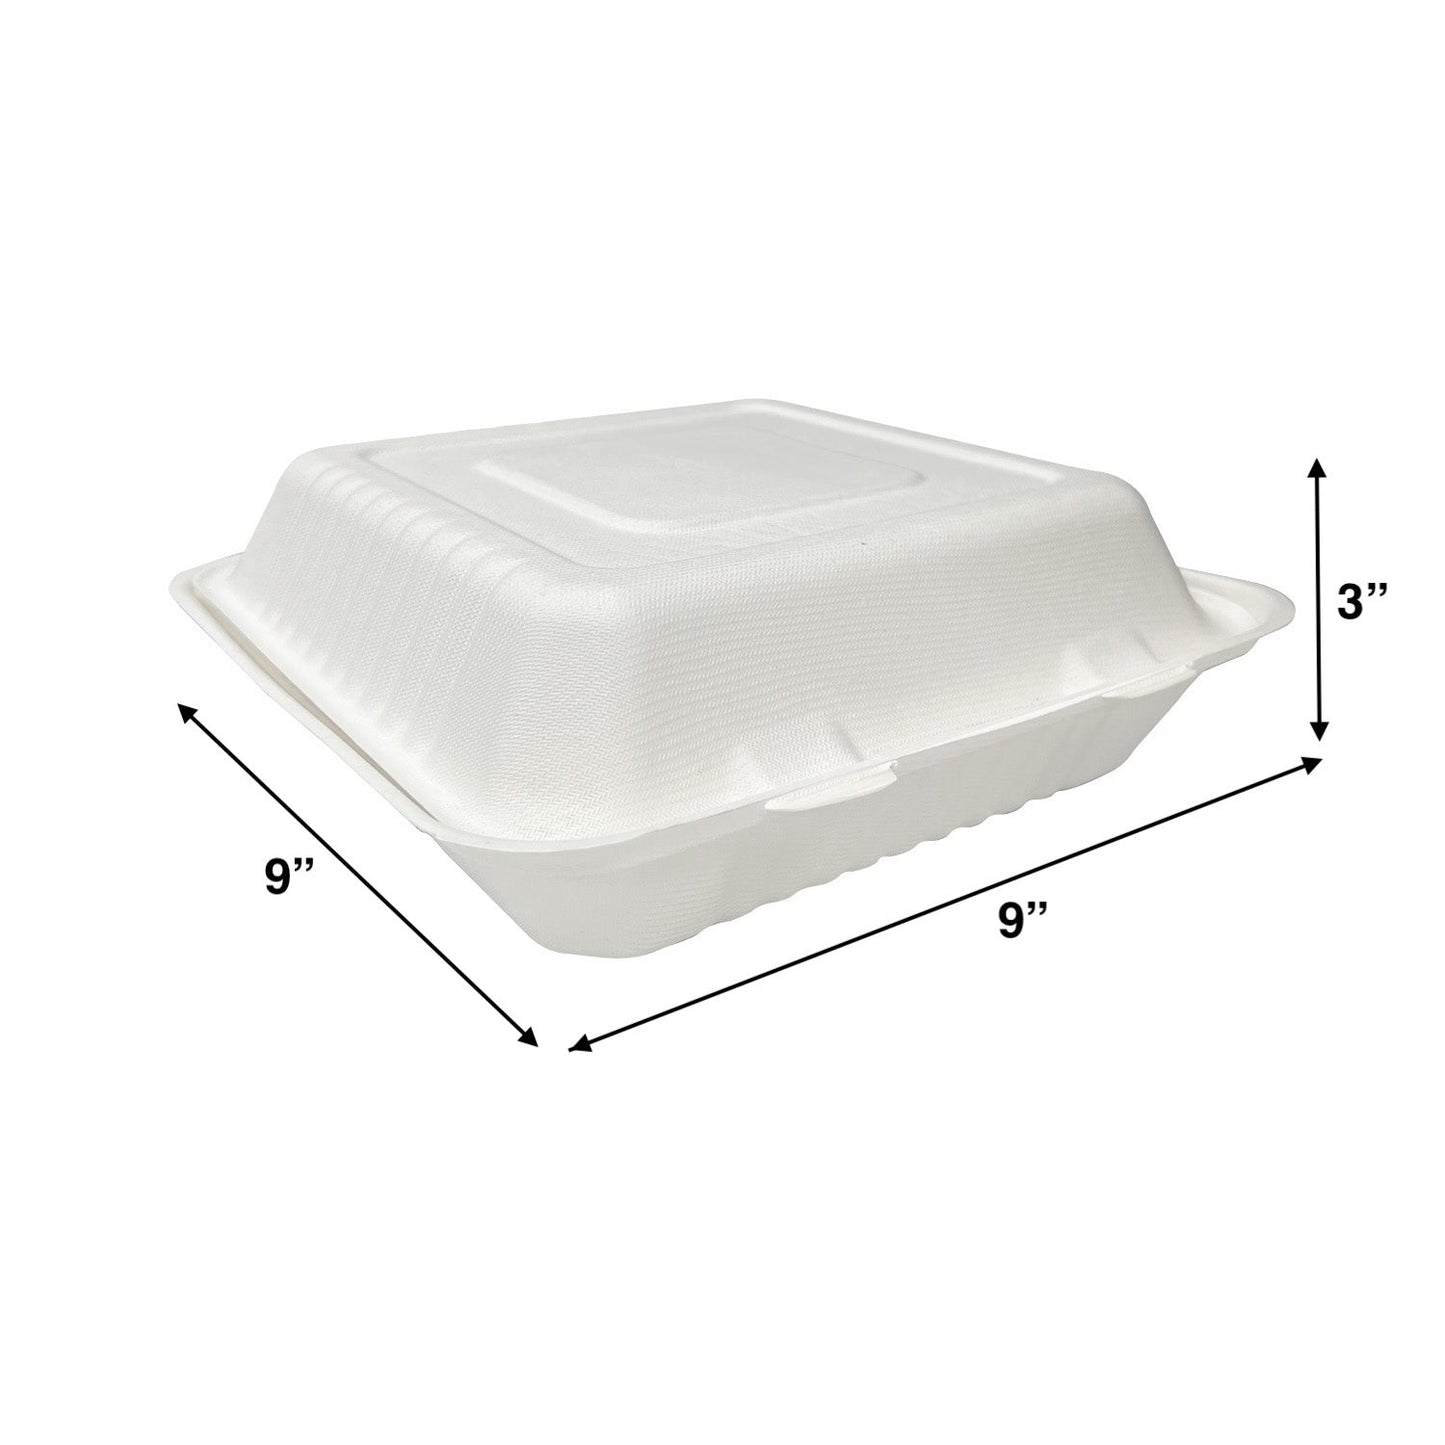 KIS-S9931 | 9x9x3 inches, 1-Compartment, Sugarcane Clamshell Food Container; $0.177/pc